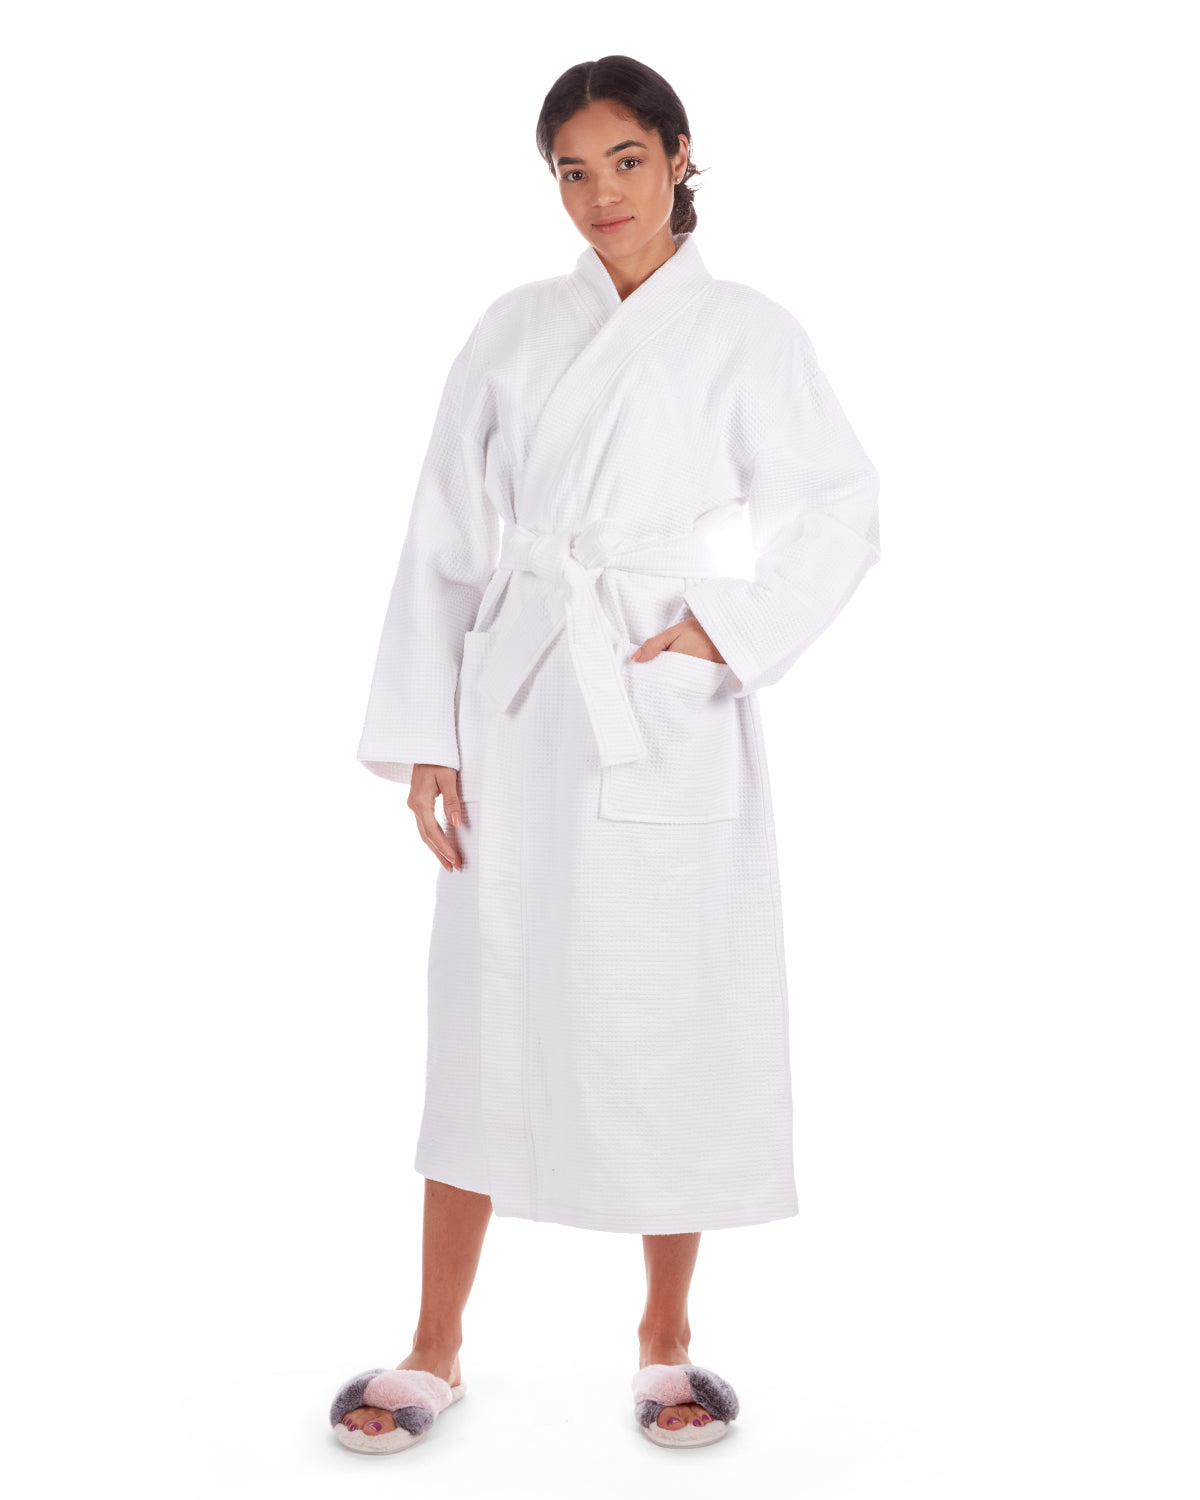 JMR Bathrobe for Men and Women-100% Cotton Unisex Kimono Robe With Belt & 2  Front Pockets-Soft Towel Robes for Spa,Pool,Hotel at  Women’s